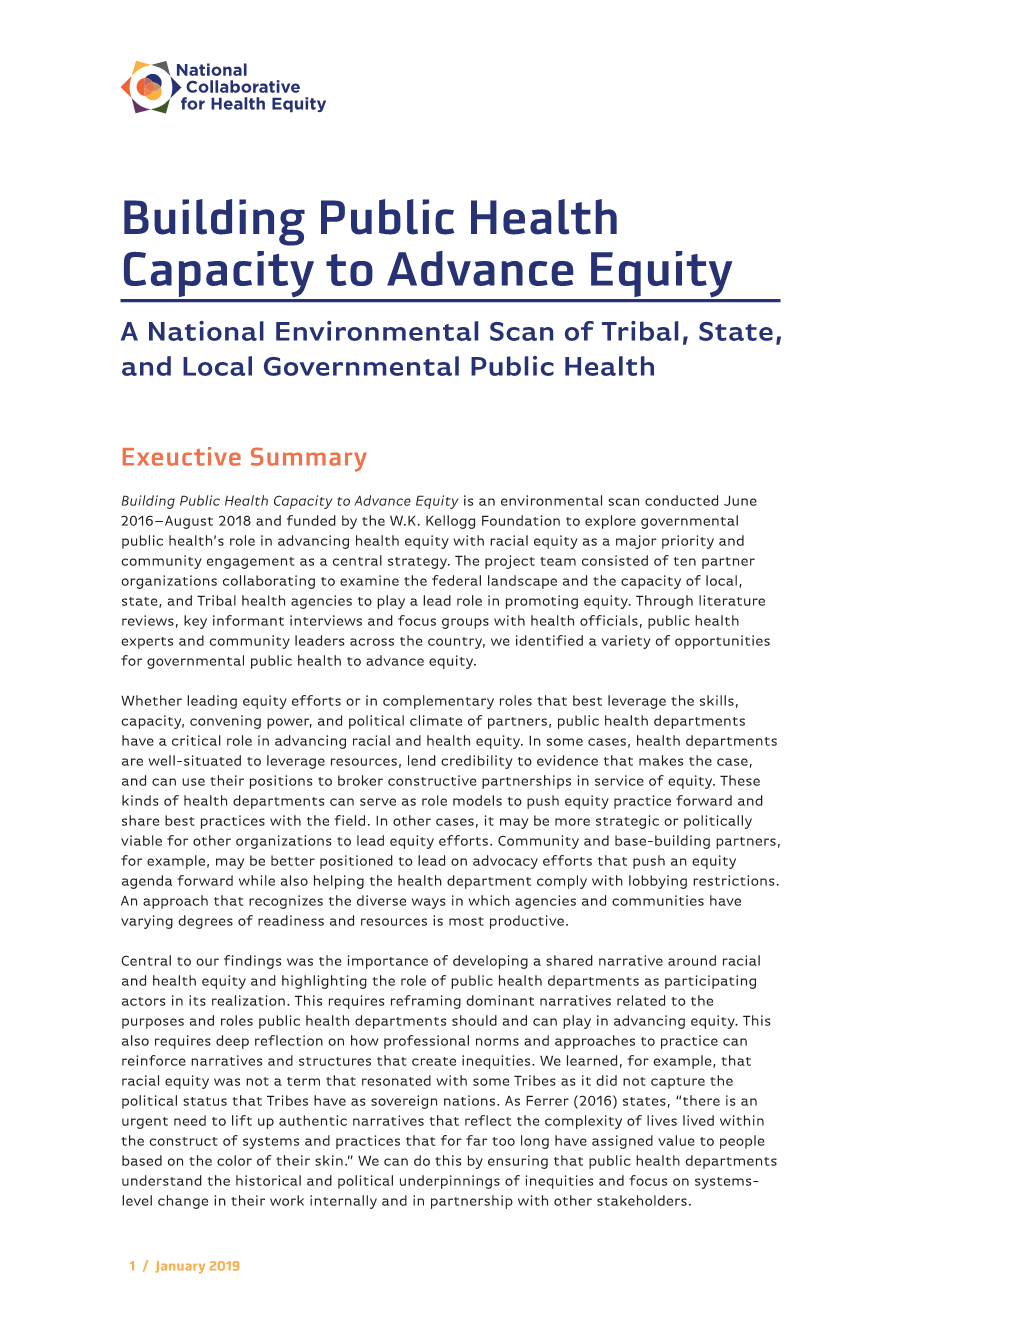 Building Public Health Capacity to Advance Equity a National Environmental Scan of Tribal, State, and Local Governmental Public Health